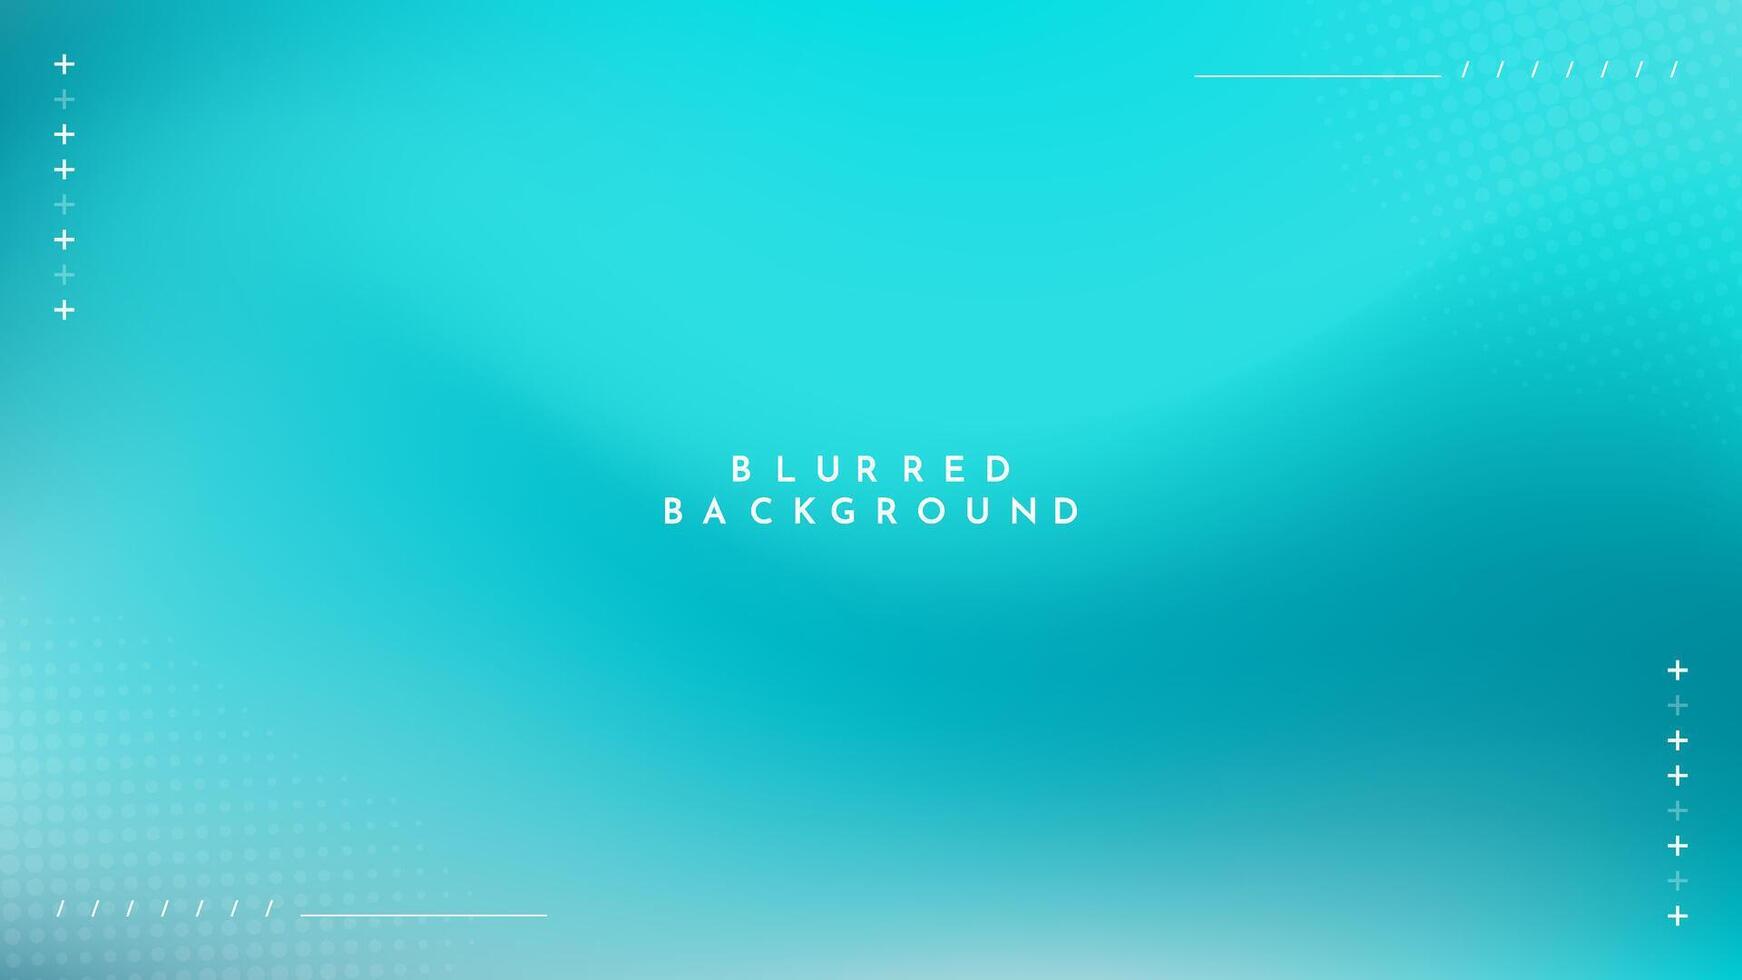 Abstract Background blue white color with Blurred Image is a  visually appealing design asset for use in advertisements, websites, or social media posts to add a modern touch to the visuals. vector